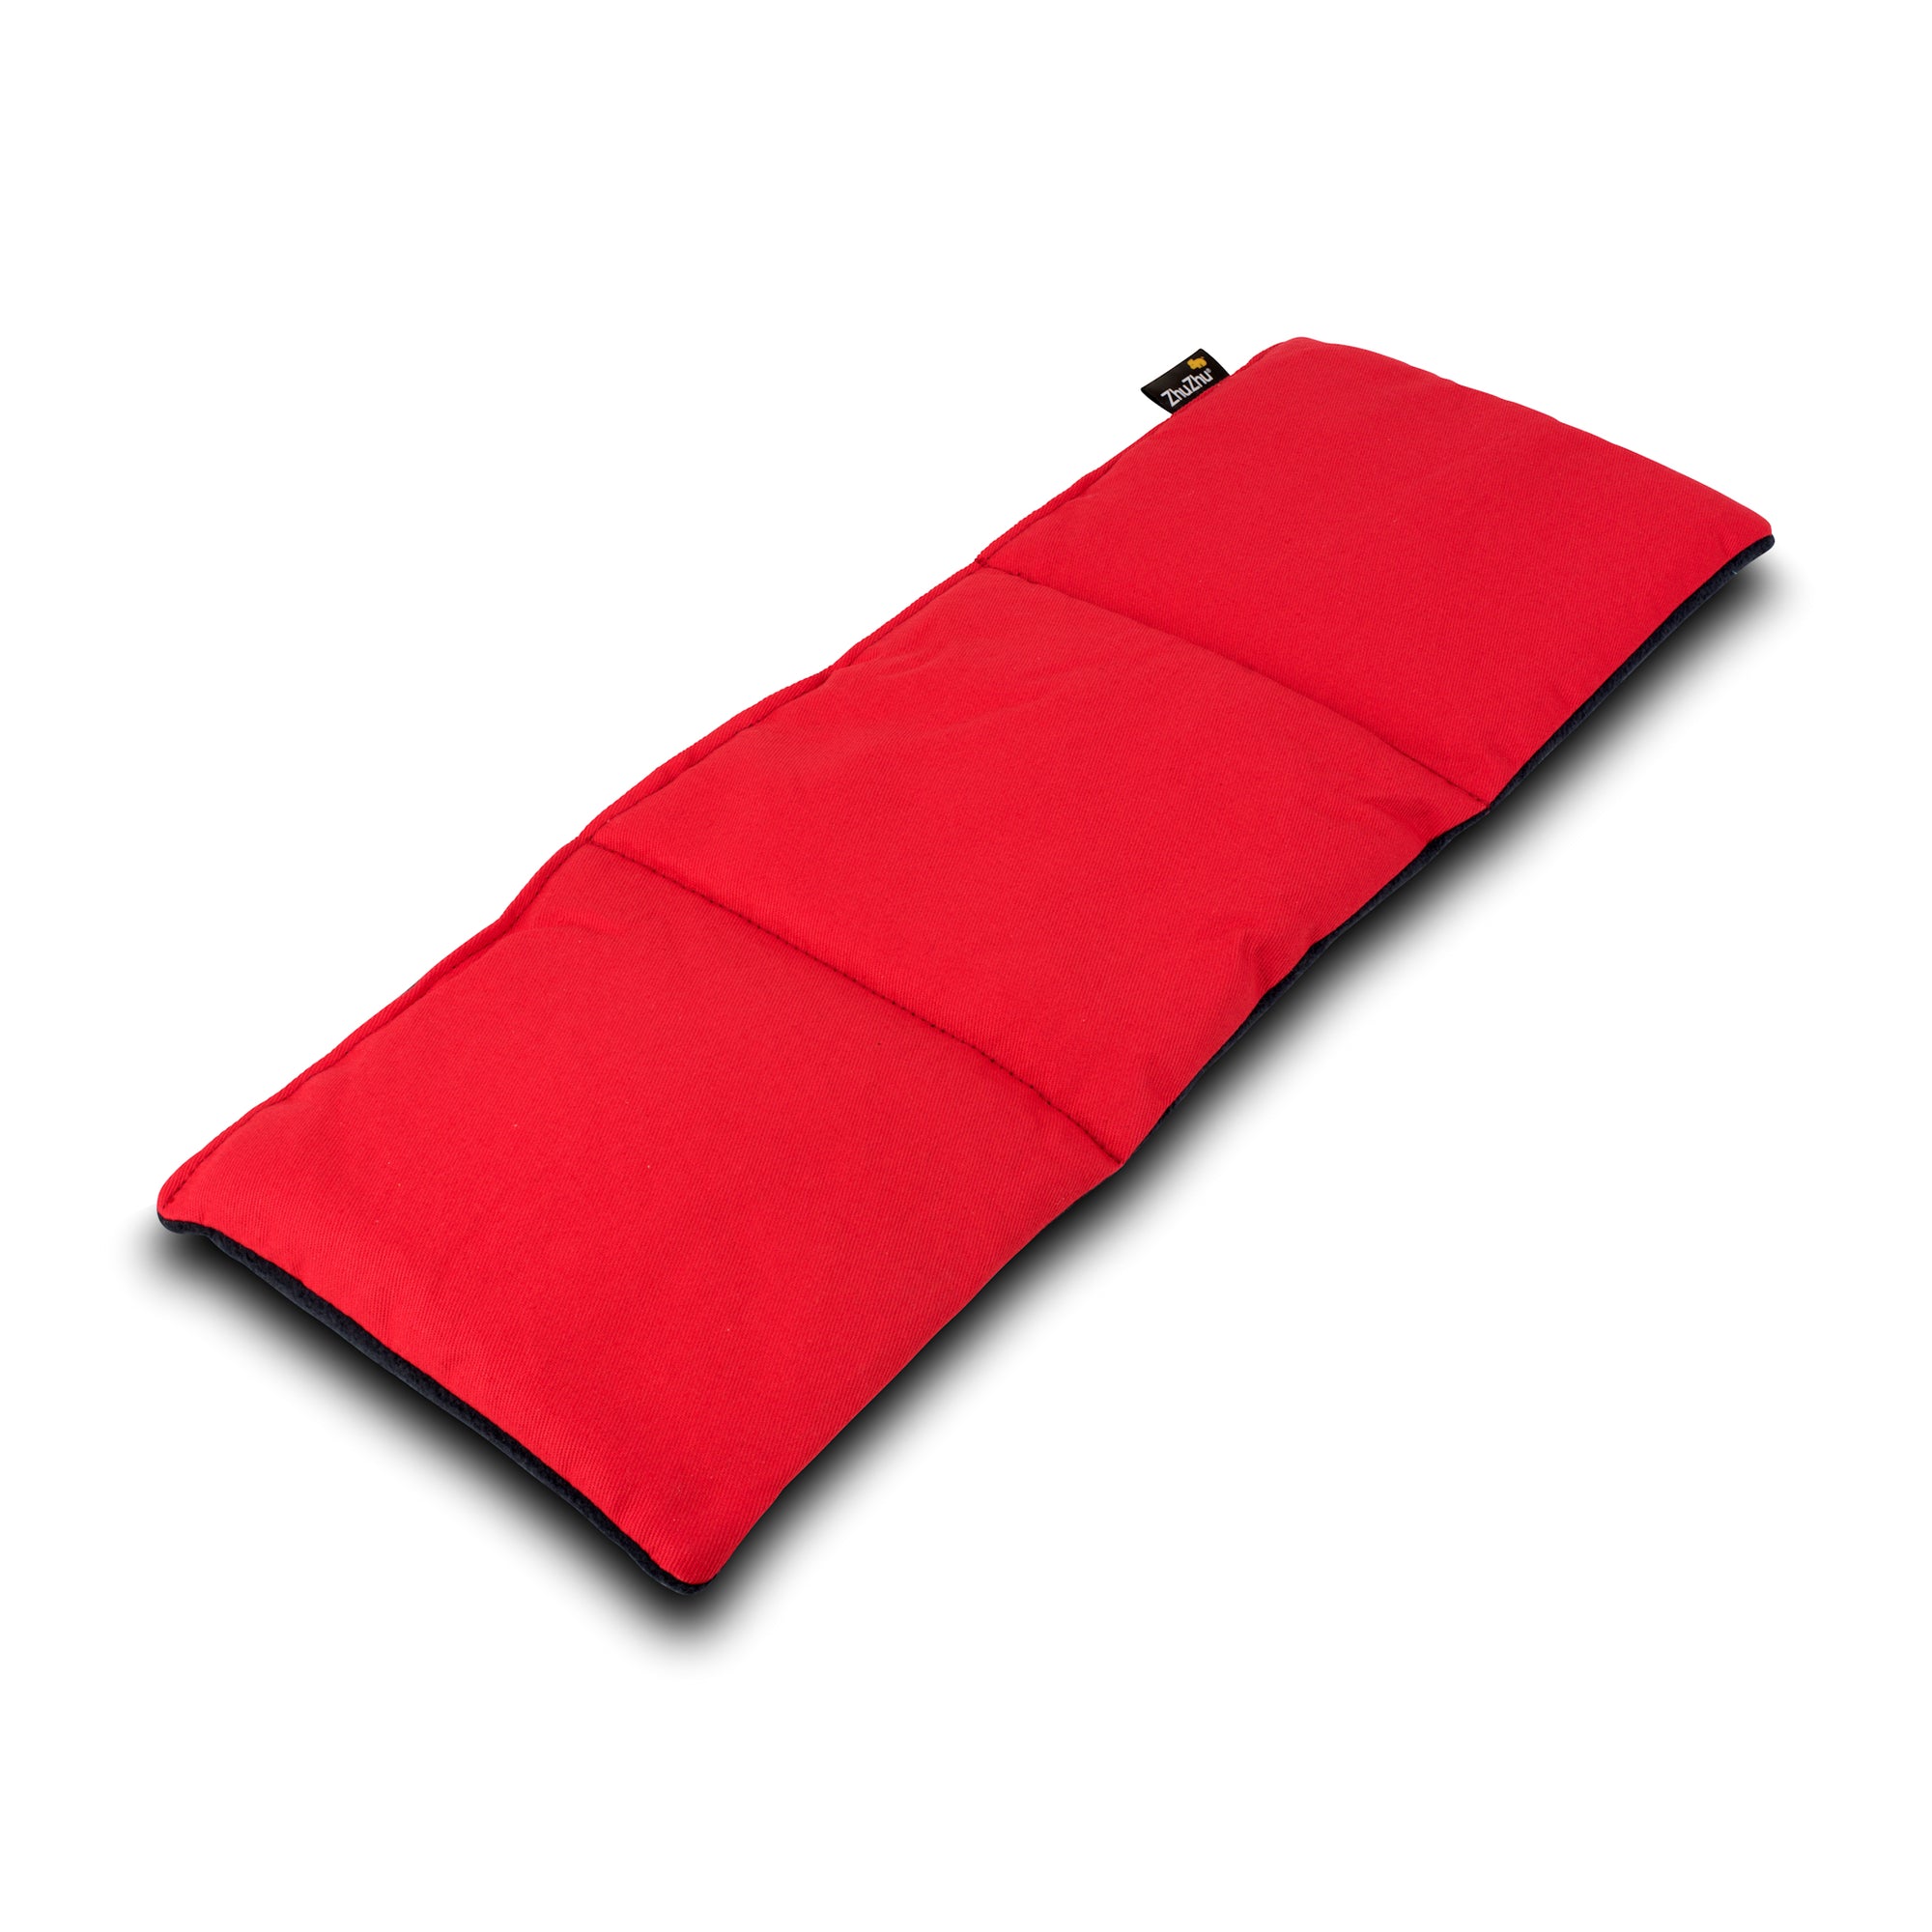 Zhu-Zhu Soothing Heat Pack - Navy Fleece & Red Twill Unscented Microwave Wheat Bag